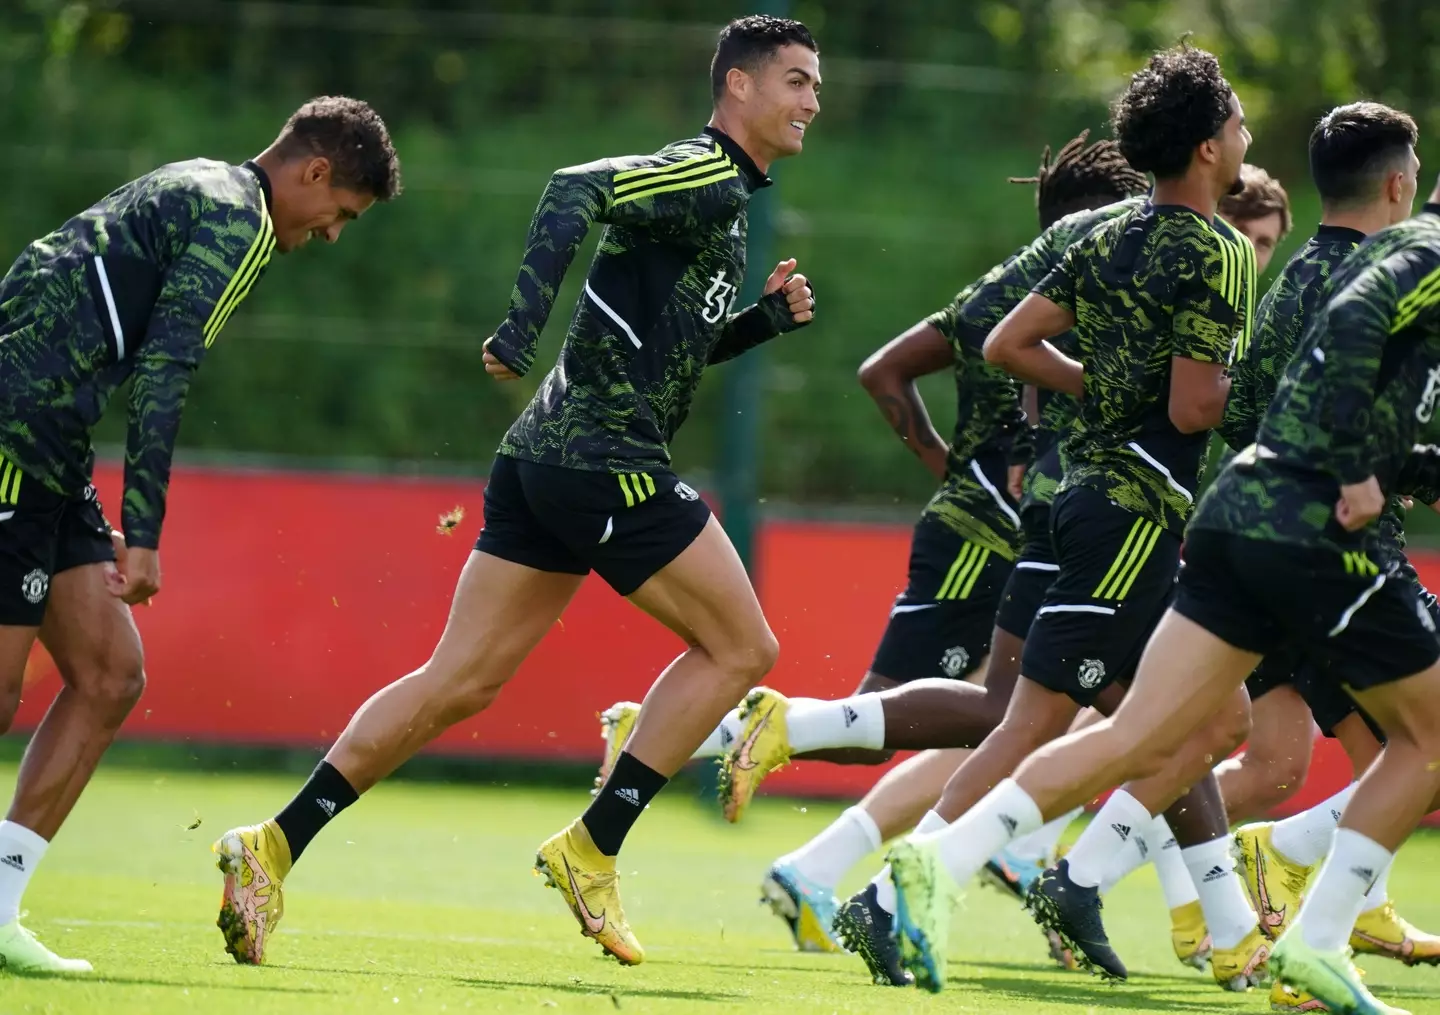 United players in training. (Image